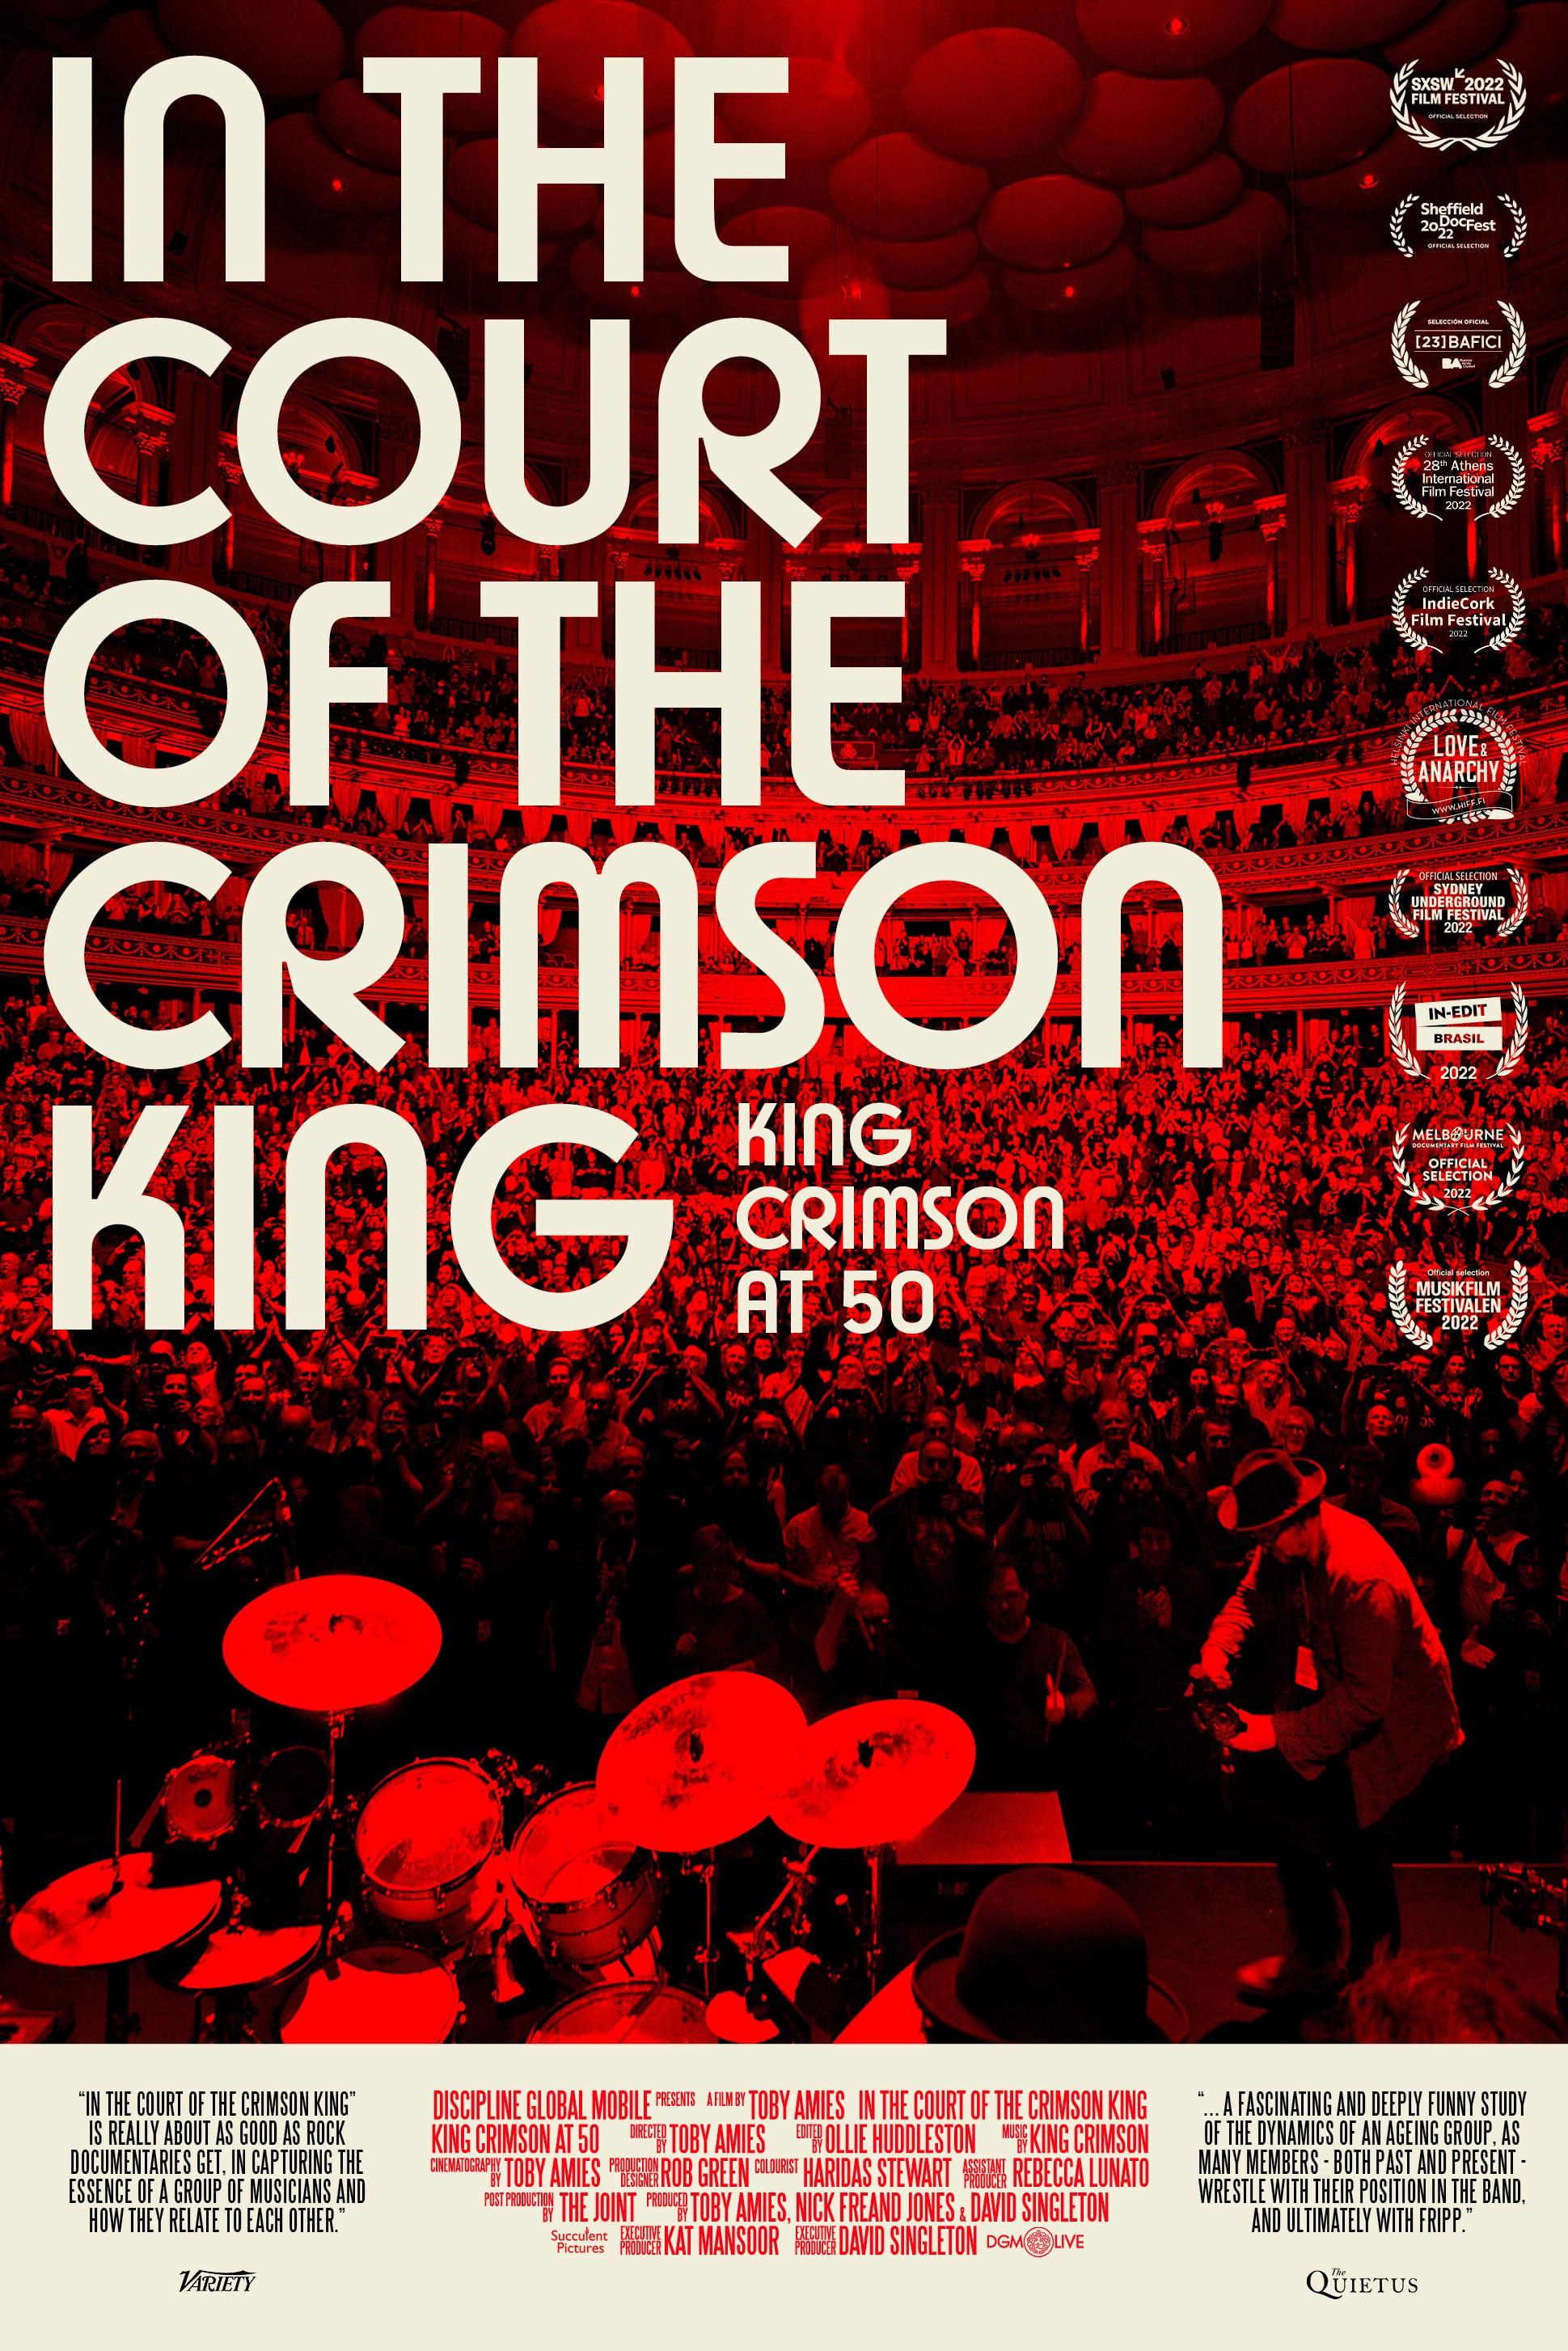 In the Court of the Crimson King: King Crimson at 50 poster